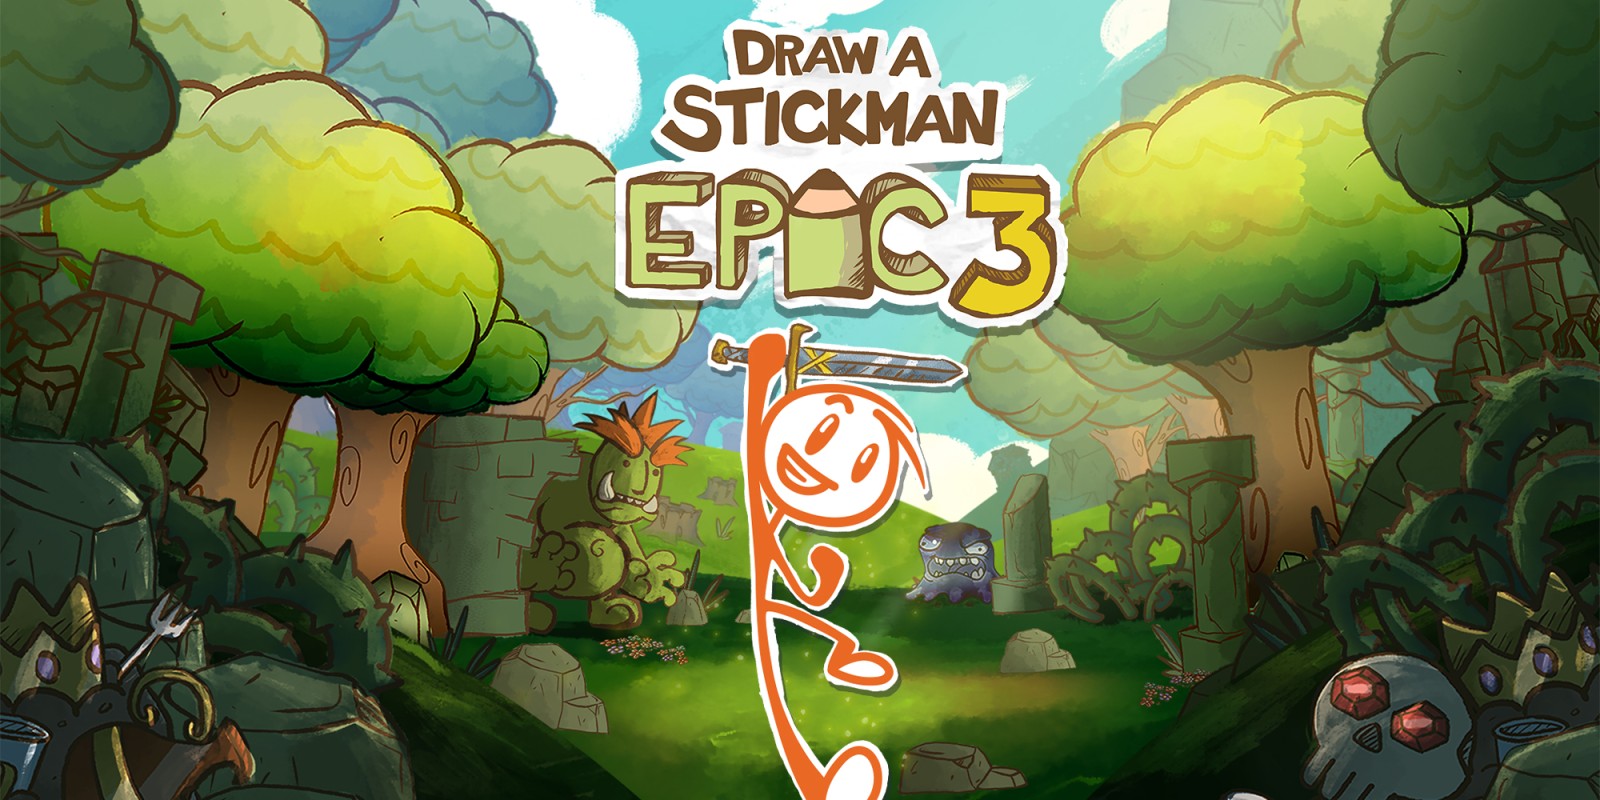 Draw a Stickman EPIC 3 Nintendo Switch download software Games